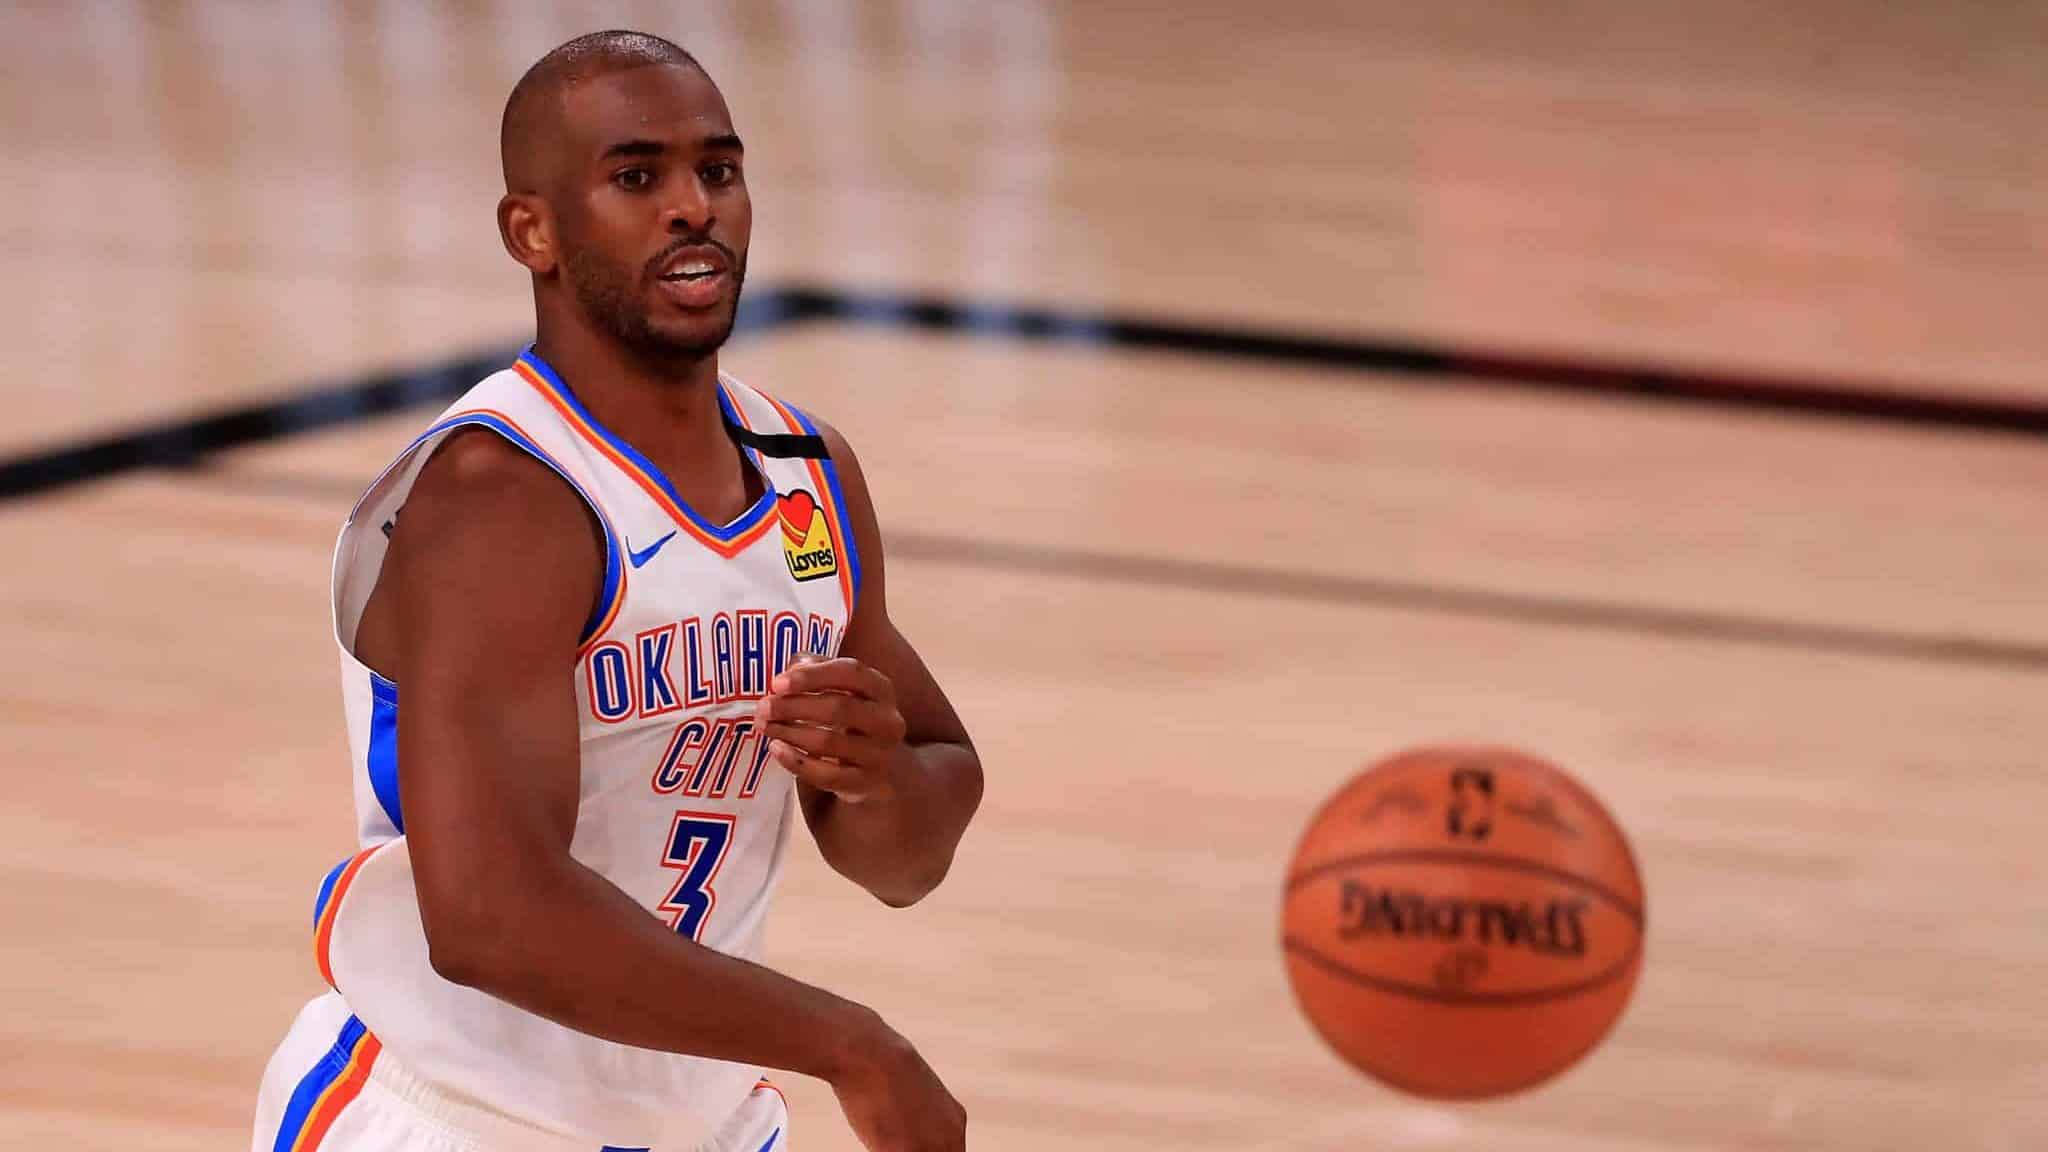 LAKE BUENA VISTA, FLORIDA - SEPTEMBER 02: Chris Paul #3 of the Oklahoma City Thunder passes the ball during the second quarter against the Houston Rockets in Game Seven of the Western Conference First Round during the 2020 NBA Playoffs at AdventHealth Arena at ESPN Wide World Of Sports Complex on September 02, 2020 in Lake Buena Vista, Florida. NOTE TO USER: User expressly acknowledges and agrees that, by downloading and or using this photograph, User is consenting to the terms and conditions of the Getty Images License Agreement.